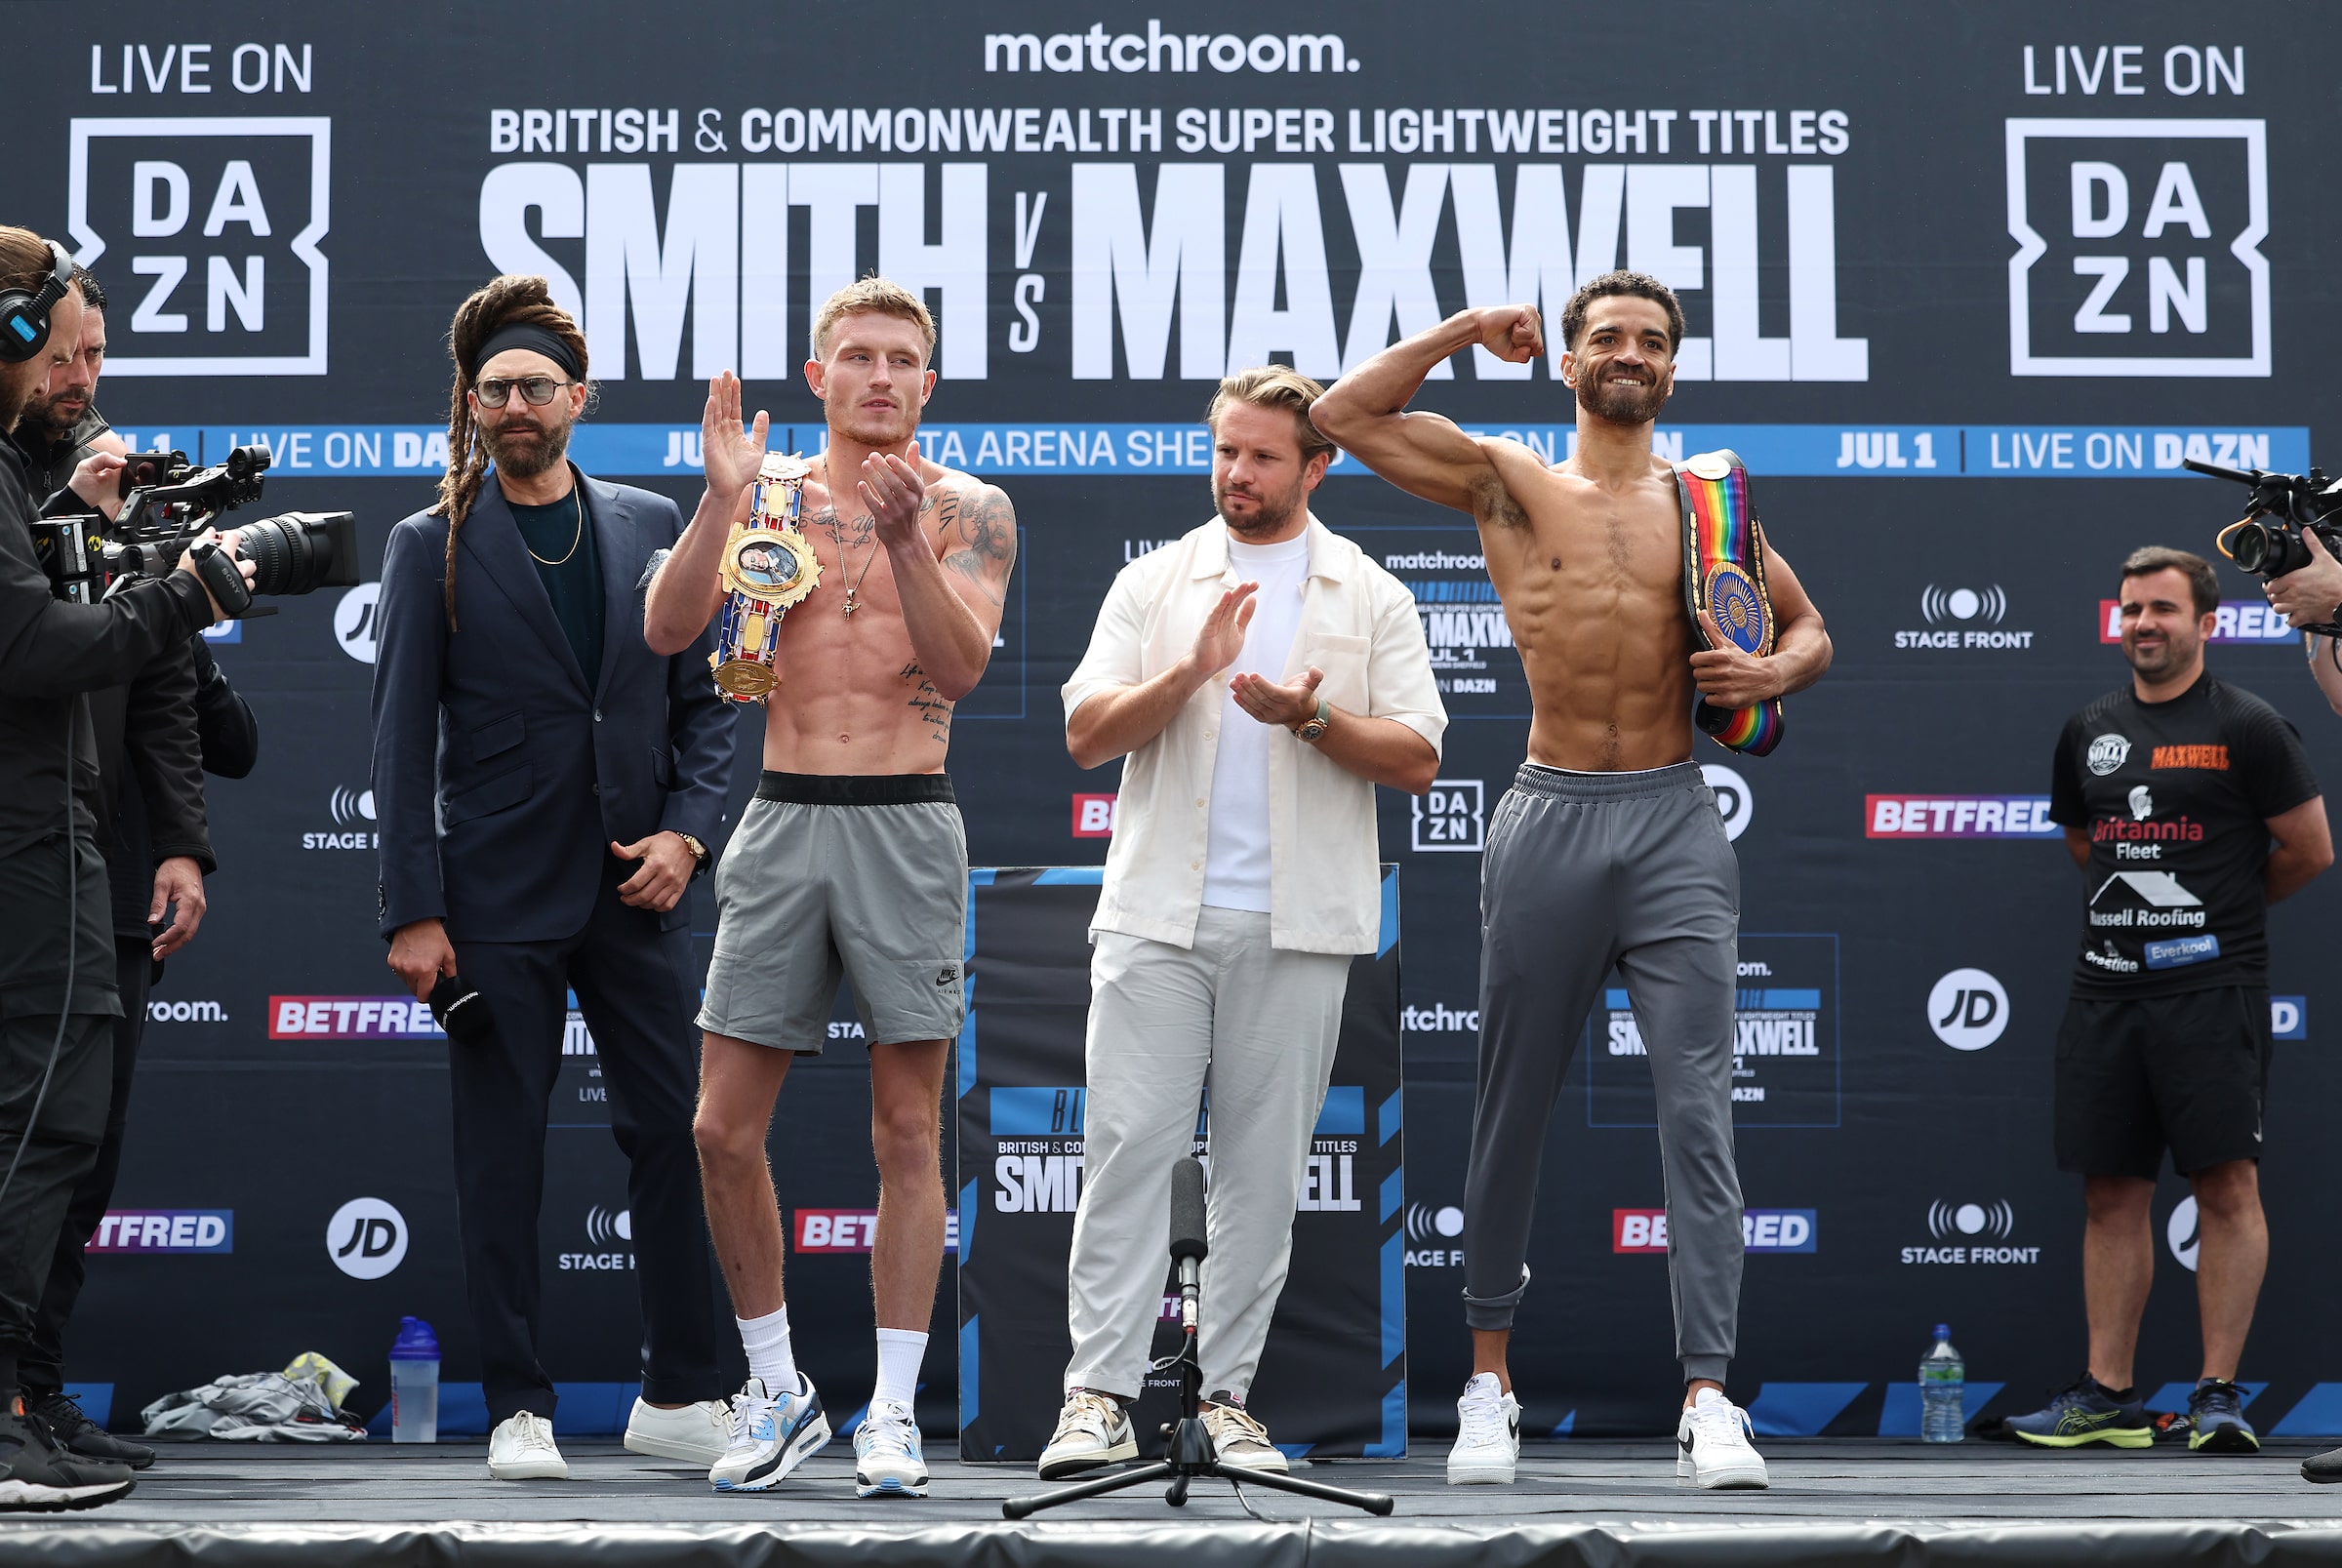 Smith & Maxwell make weight ahead of British & Commonwealth title encounter